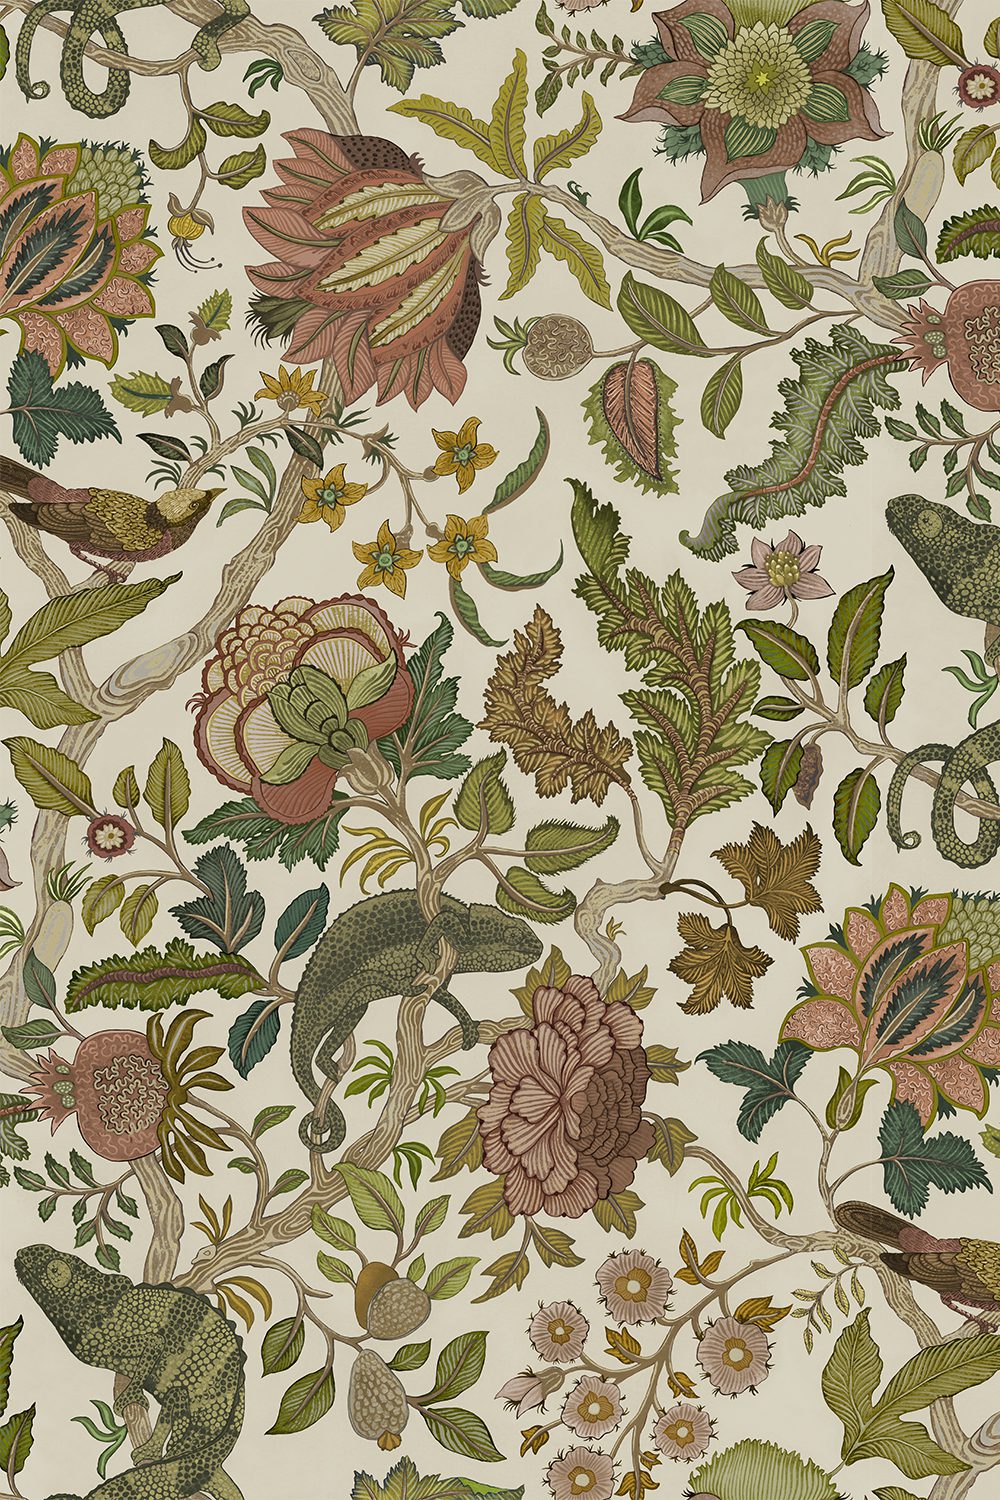 Chameleon Trail Wallpaper | Dusty Pinks and Olive